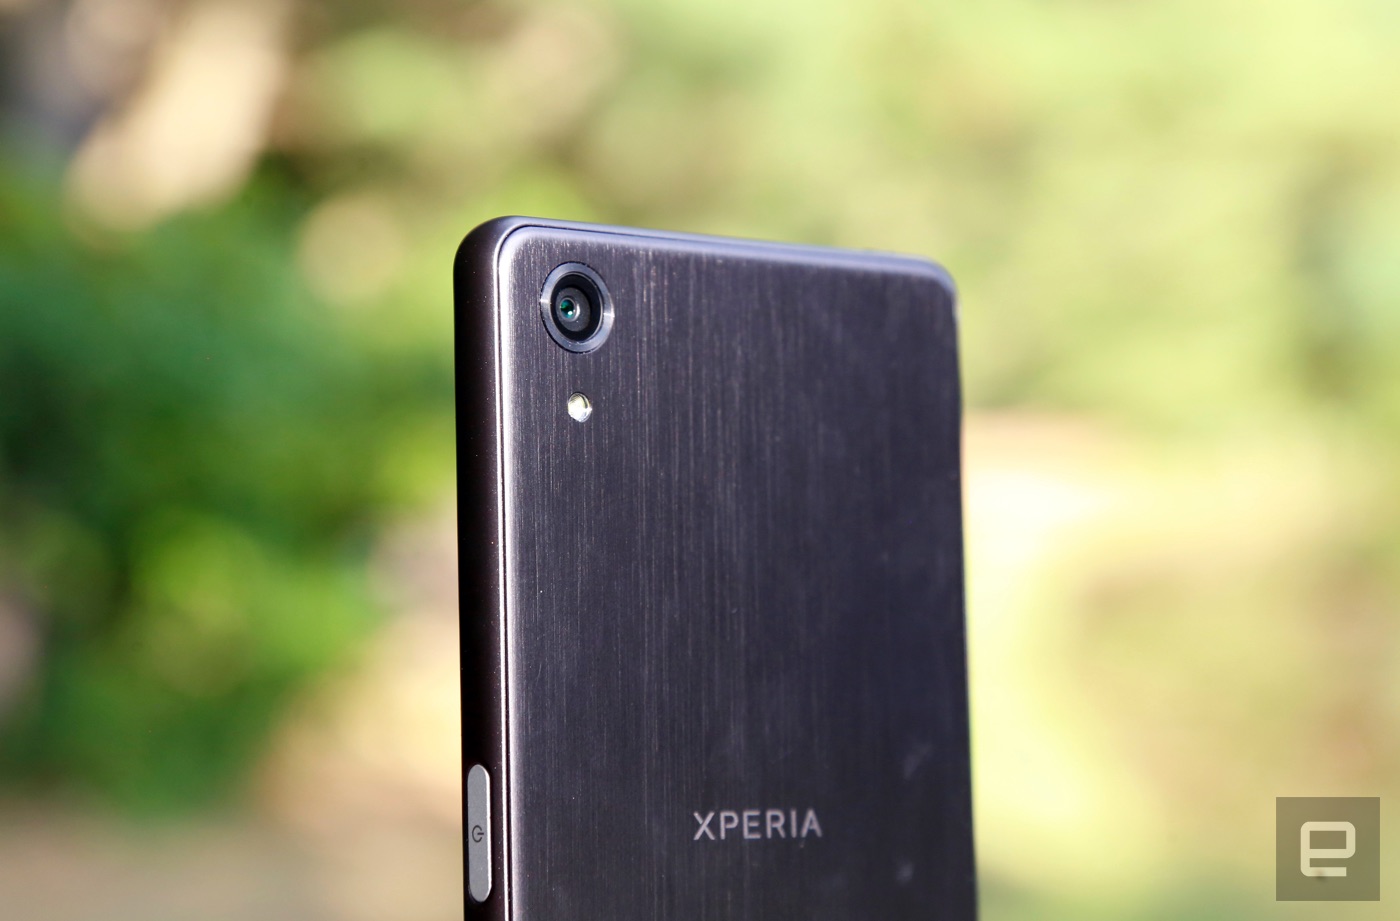 hart attribuut Vlieger Sony Xperia X Performance review: $700 worth of disappointment | Engadget